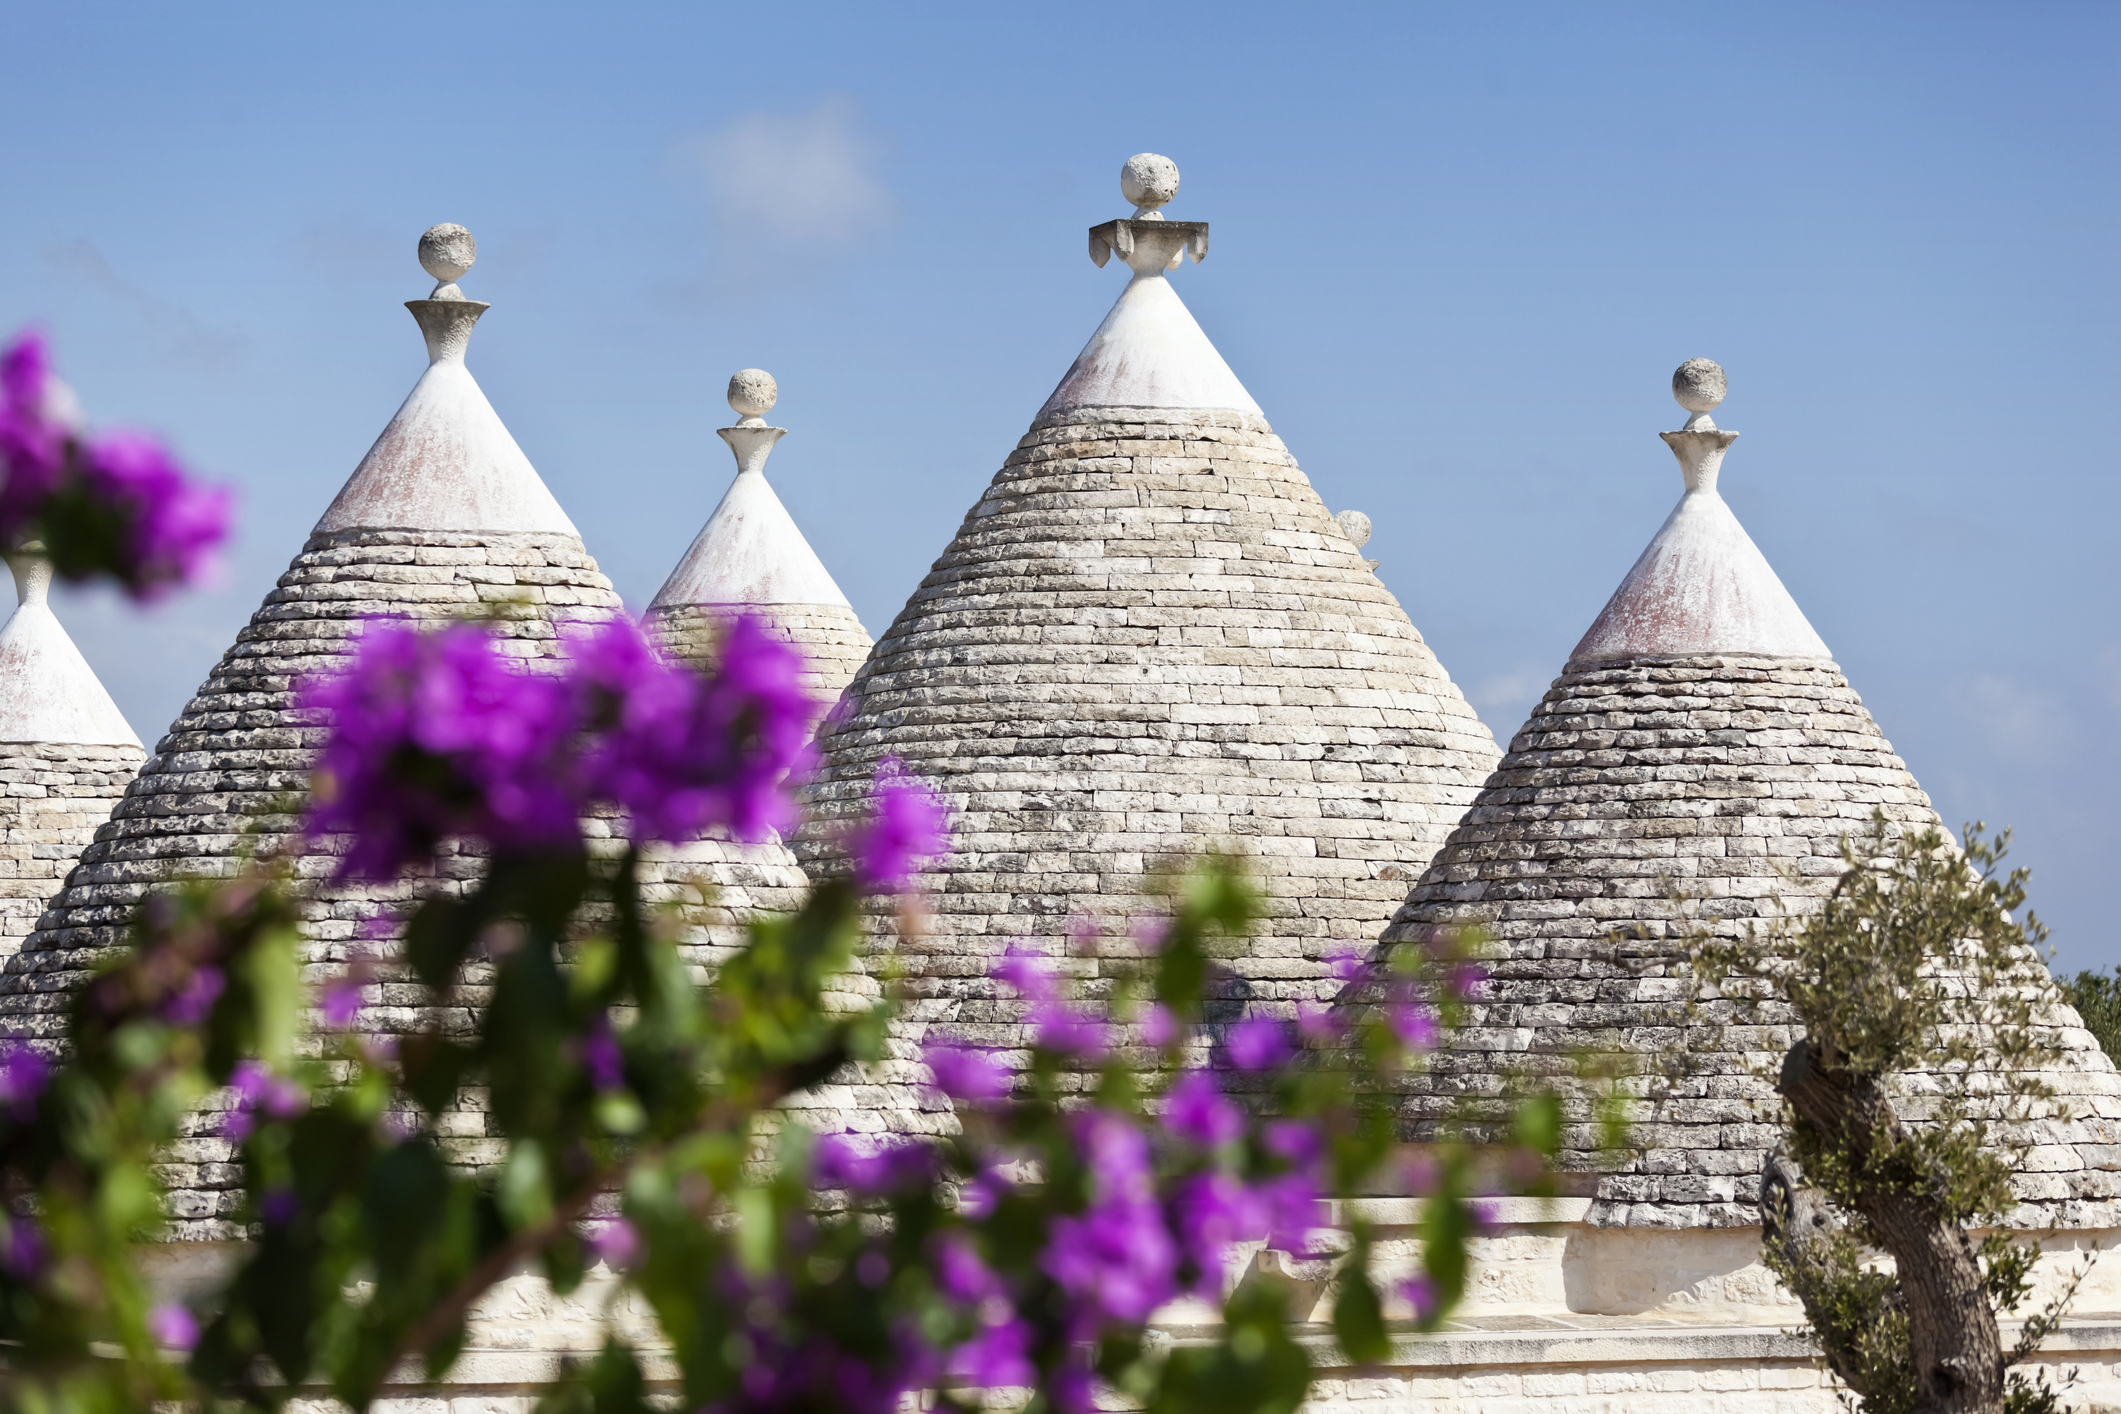 A limestone trullo in Puglia, in the Itrea Valley, in Southern Italy, the only place that these dry stone buildings with their conical roofs can be found. Mostly built as field or agricultural buildings, many became homes and are now sought after for refurbishment and holiday homes.